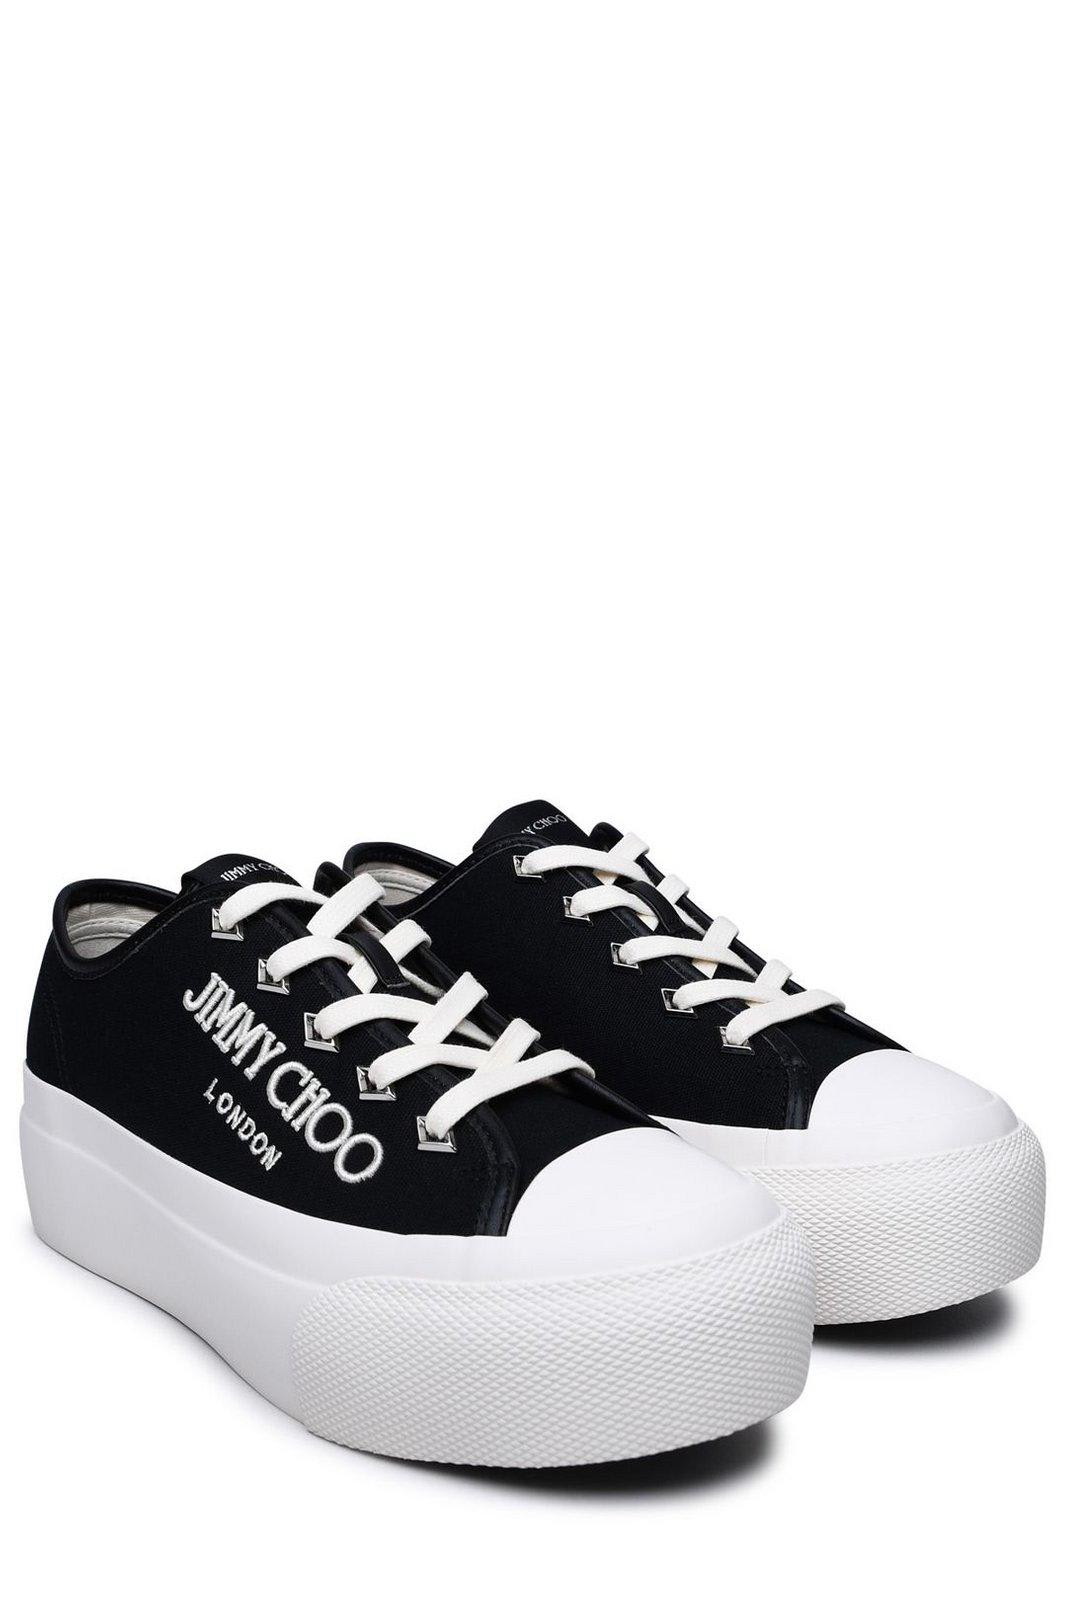 Shop Jimmy Choo Logo Embroidered Platform Lace-up Sneakers In Black